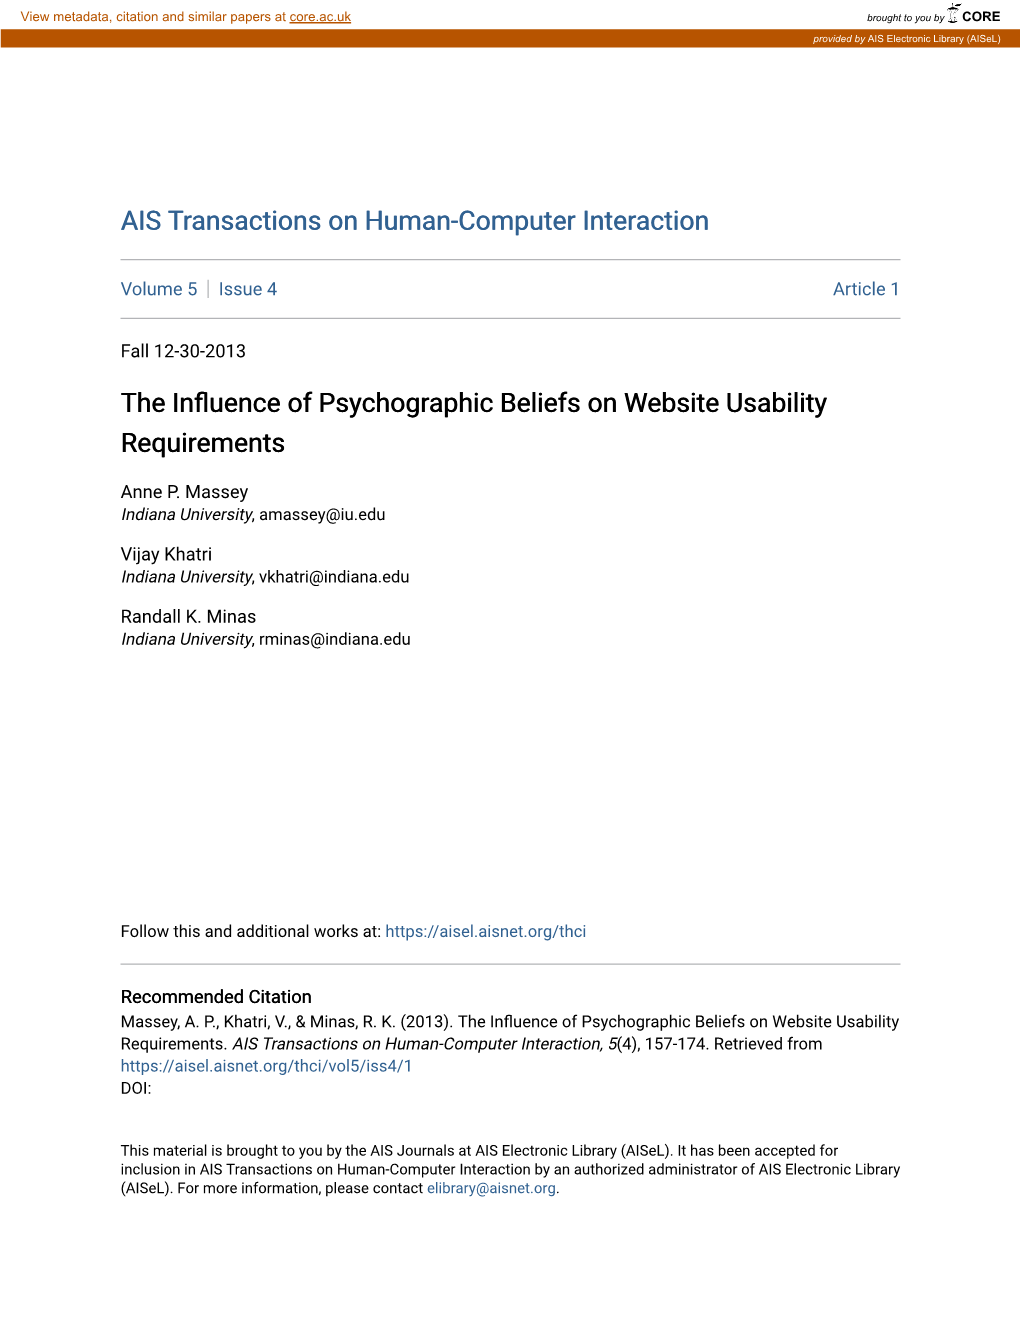 The Influence of Psychographic Beliefs on Website Usability Requirements